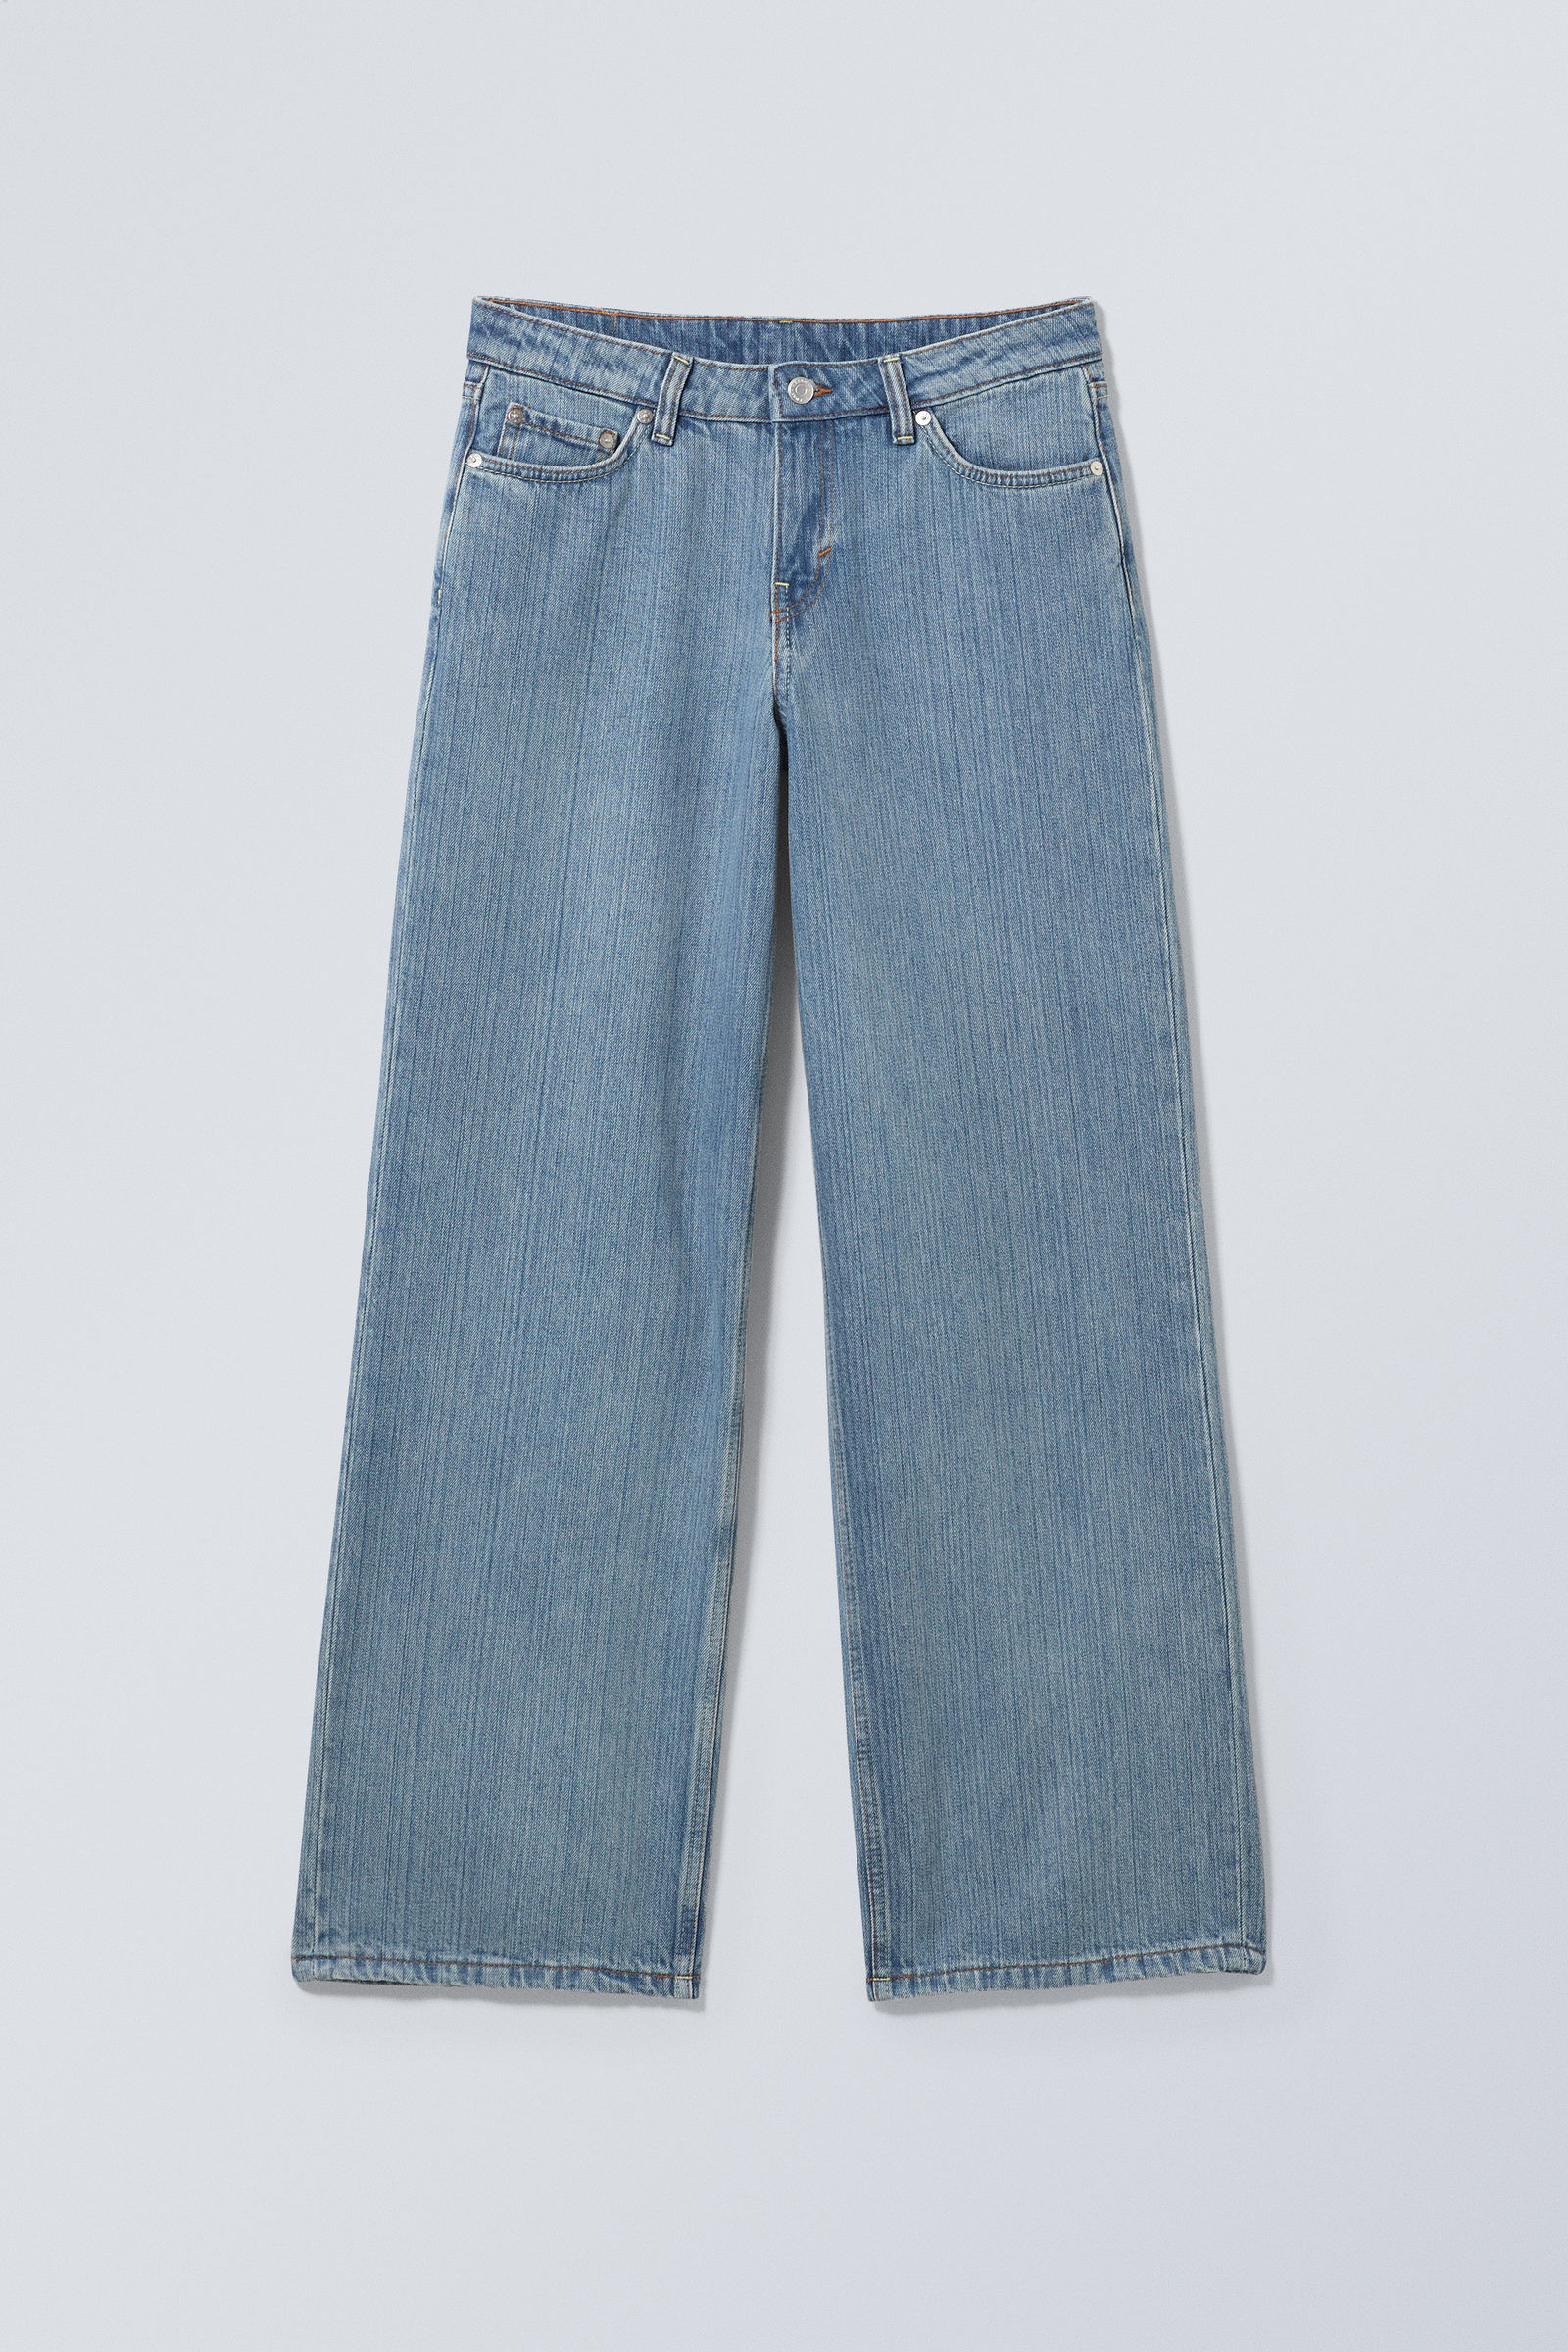 Weekday Ample low rise loose fit straigt leg jeans in novel blue